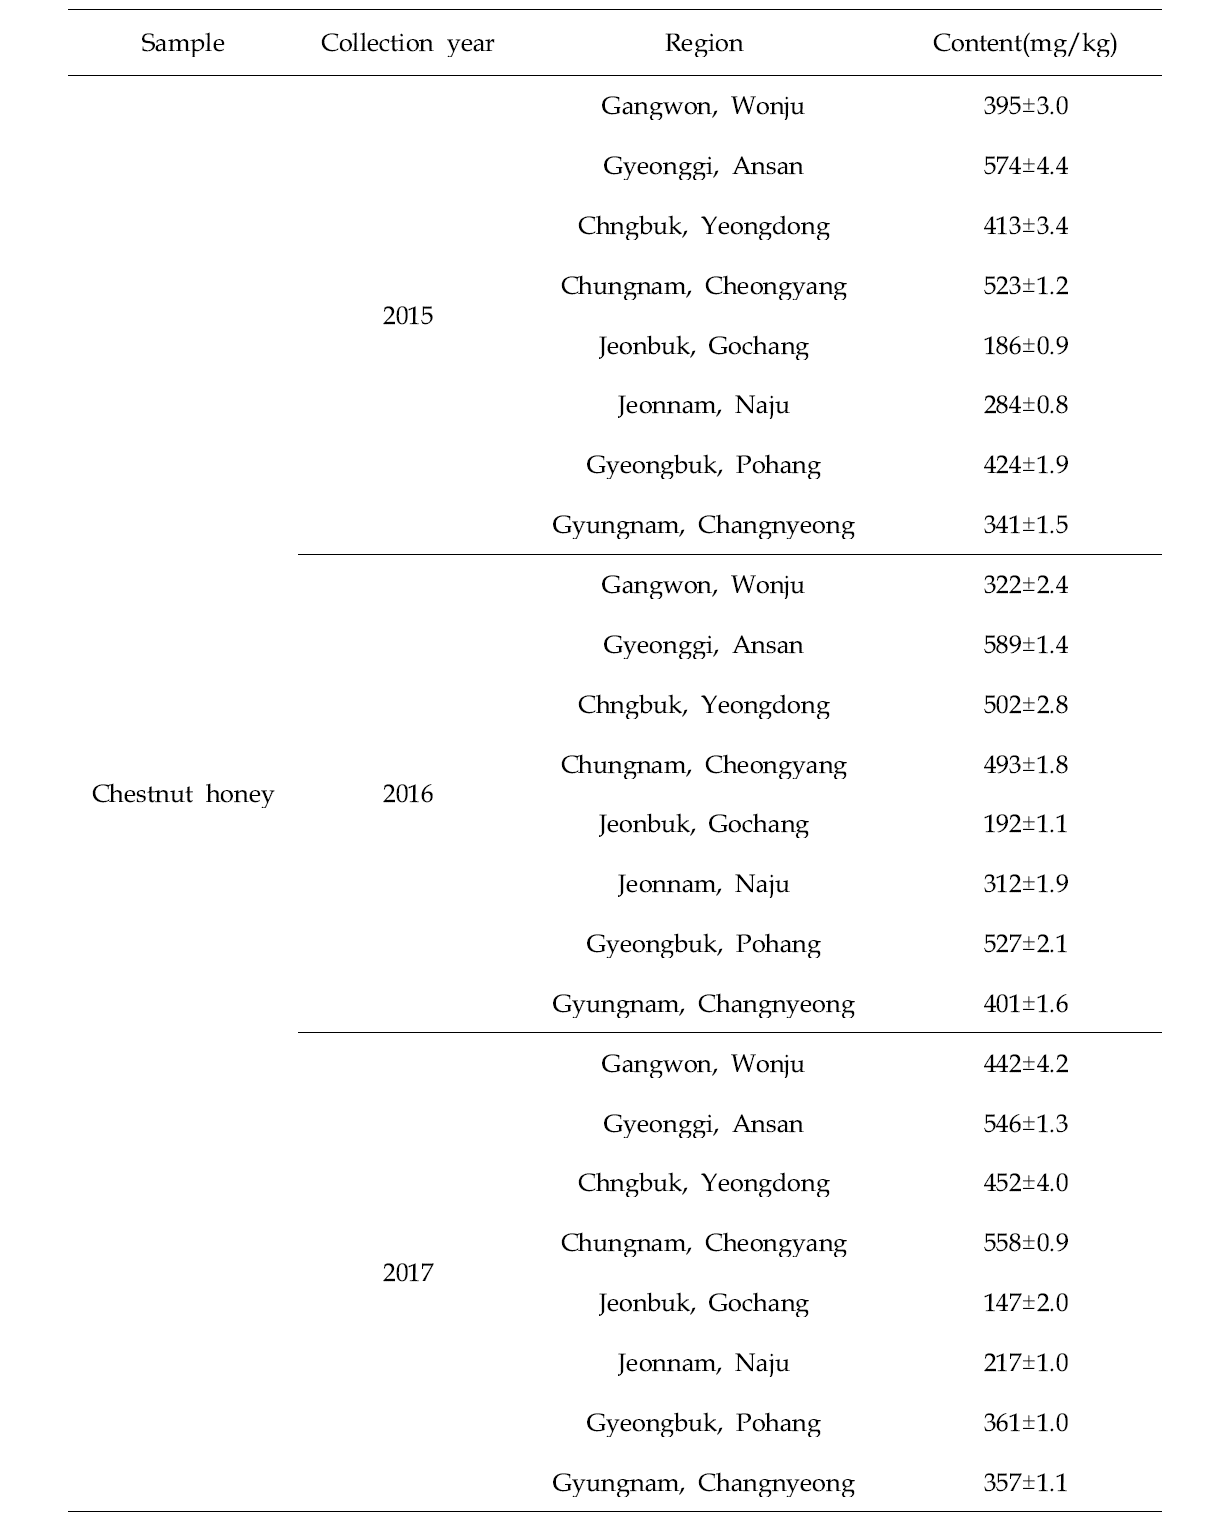 Content of kynurenic acid in chestnut honeys collected from different regions from 2015 to 2017 year in Korea